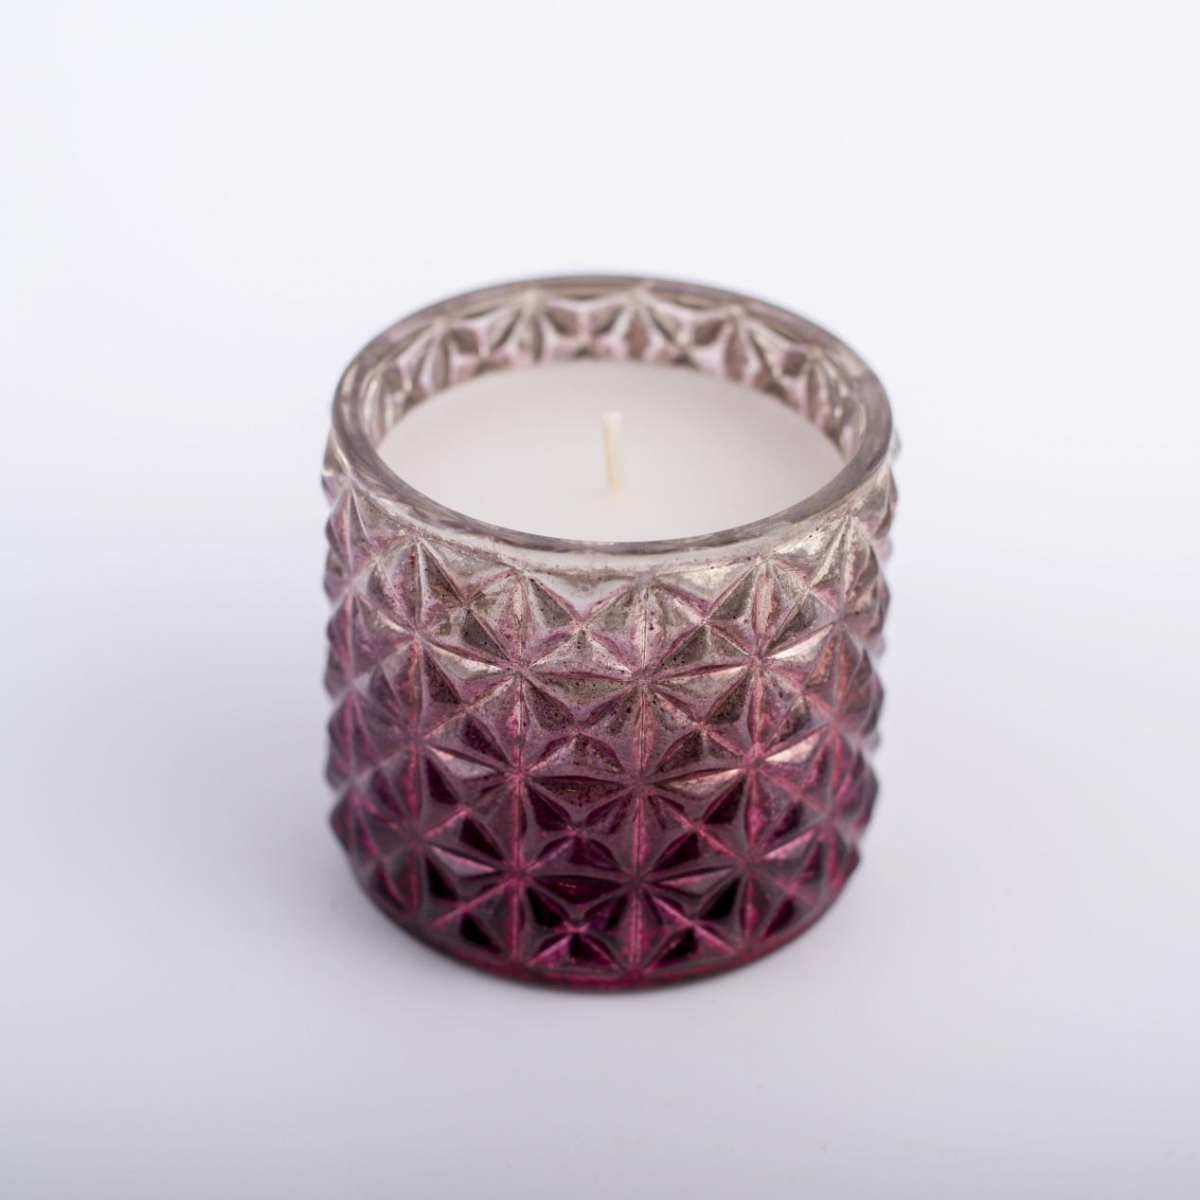 Scented Candles -Retro Diamond Glass Candle Jar ,Gradient Purple ,Essential Oil ,Soy Candles , China Factory ,Price-HOWCANDLE-Candles,Scented Candles,Aromatherapy Candles,Soy Candles,Vegan Candles,Jar Candles,Pillar Candles,Candle Gift Sets,Essential Oils,Reed Diffuser,Candle Holder,